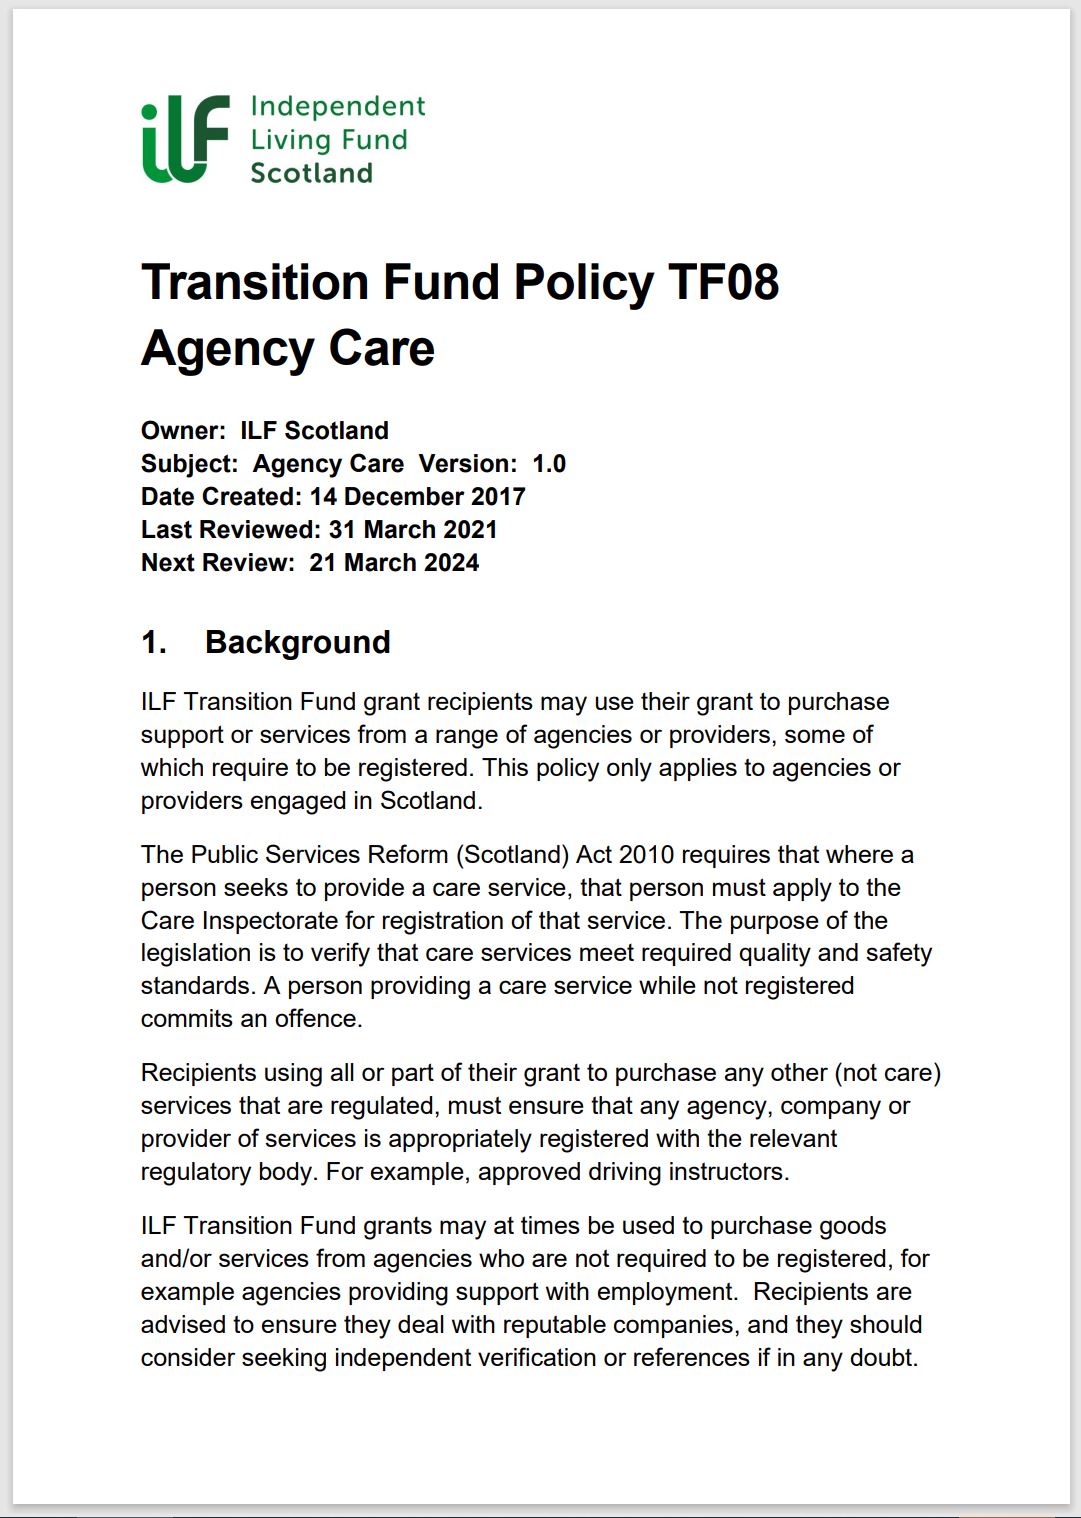 Cover page of policy TF08 showing ILF Scotland logo and first page of policy document.